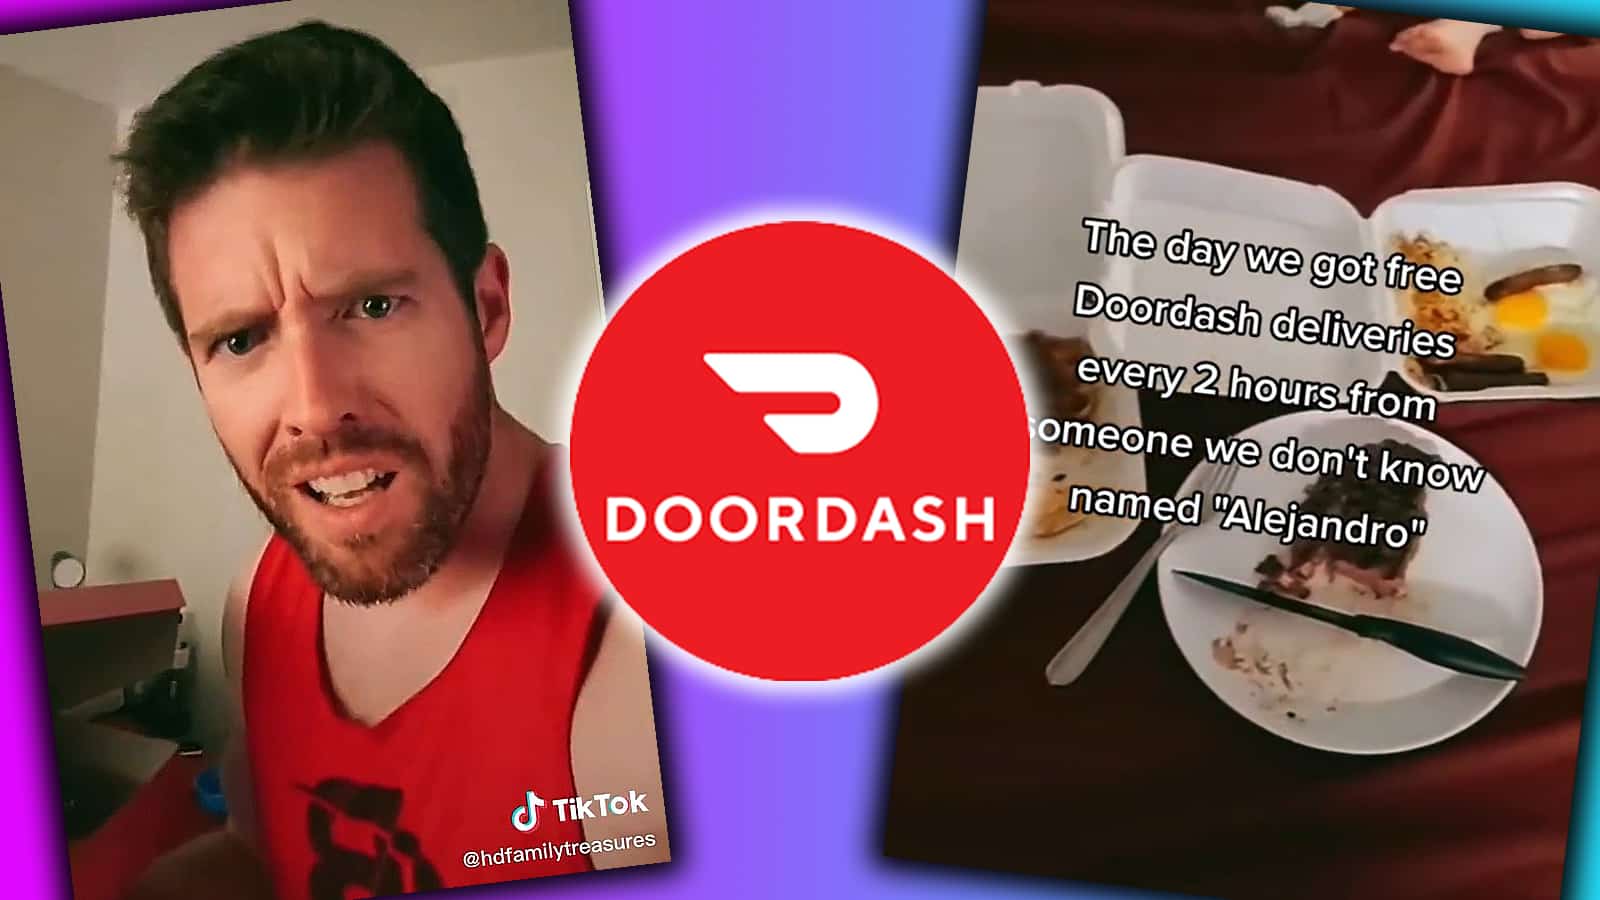 Man goes viral on TikTok for receiving free doordash from mystery customer